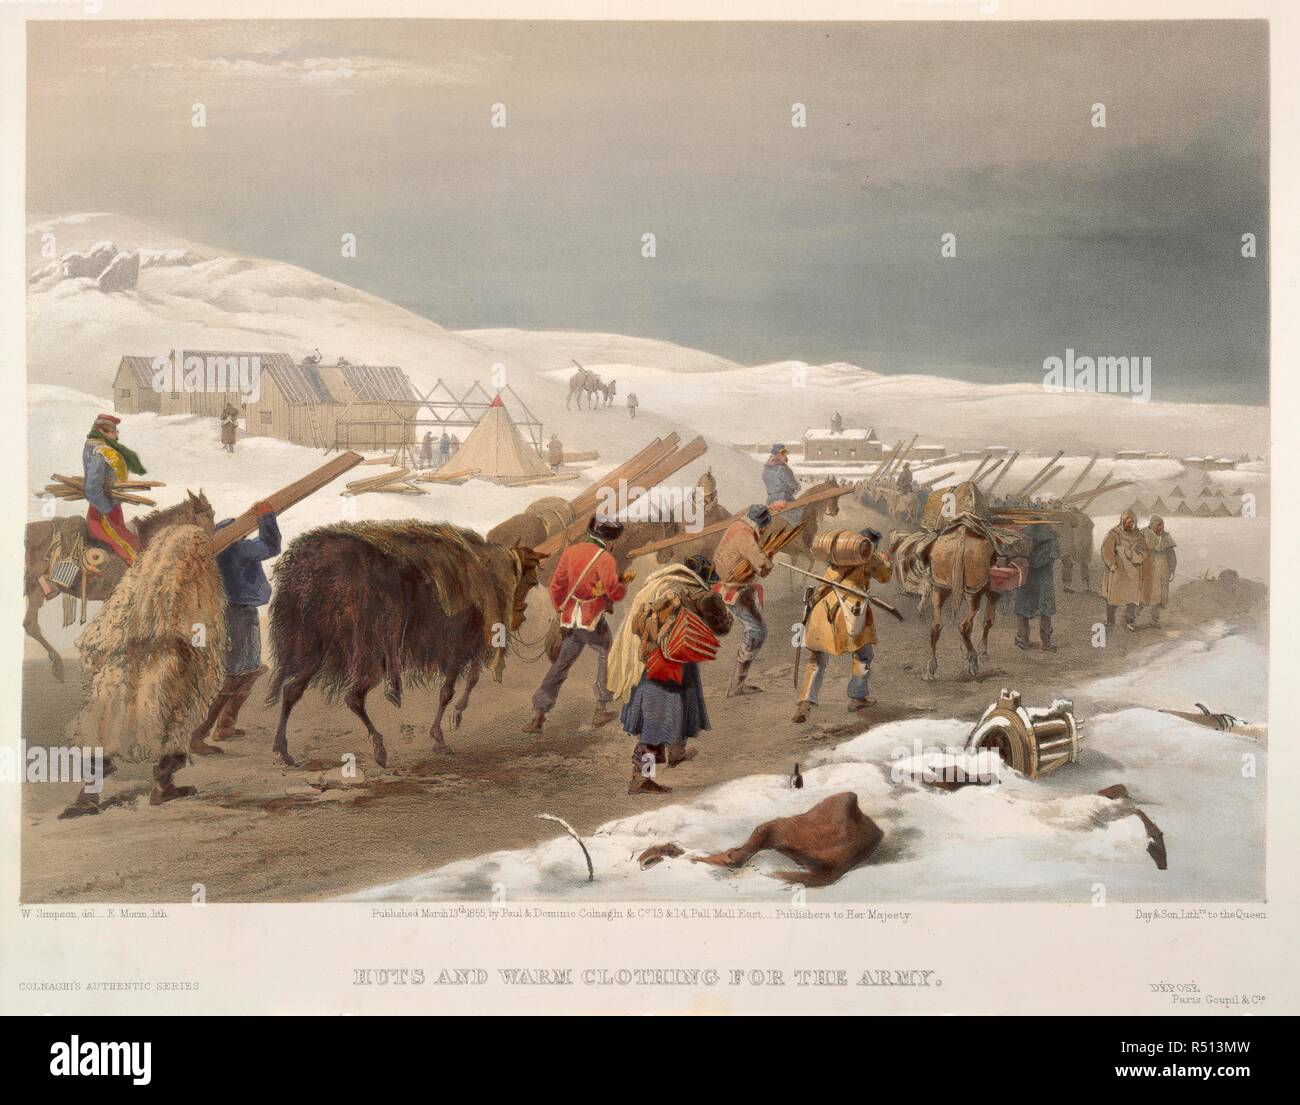 Army supplies. The Seat of War in the East. [Lithographed plates,. P & D Colnaghi & Co., London, 1855, 1856. Huts and warm clothing for the army'. A winter camp during the Crimean war.  Image taken from The Seat of War in the East. [Lithographed plates, illustrating the Crimean War.].  Originally published/produced in P & D Colnaghi & Co., London, 1855, 1856. . Source: 1780.c.6, XVI. Language: English. Author: SIMPSON, WILLIAM. WALKER E. Stock Photo